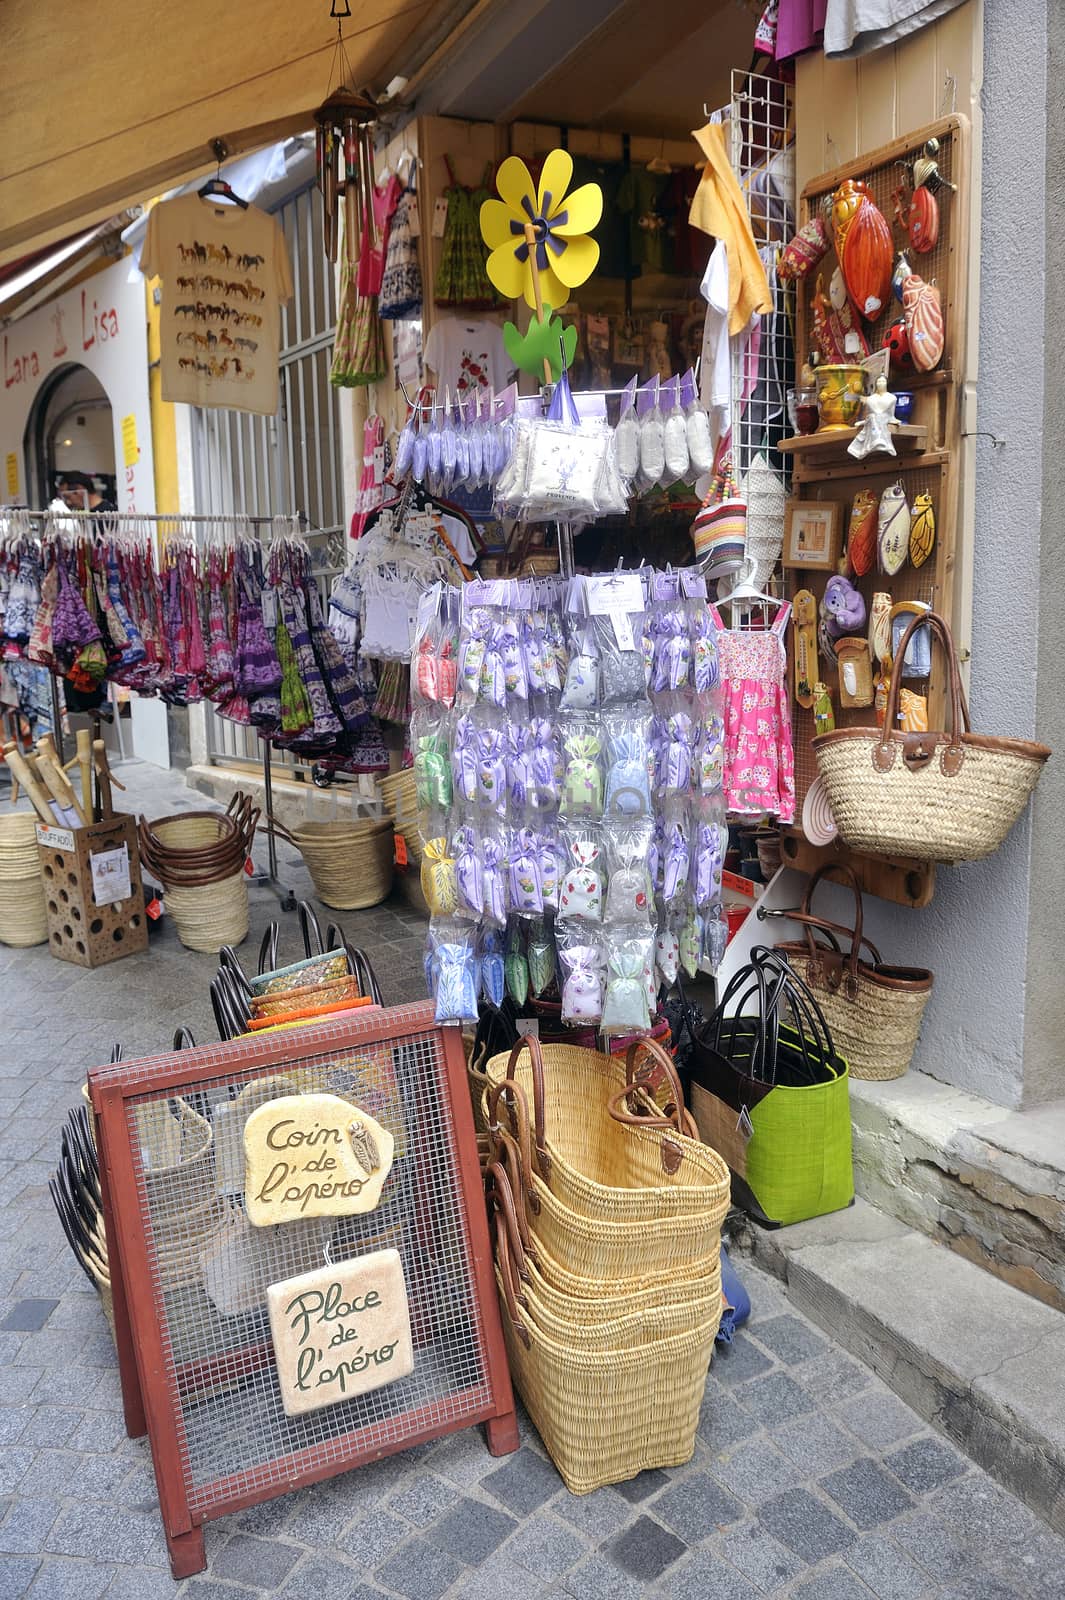 Anduze shop of handicrafts and souvenirs such as small bags of lavender